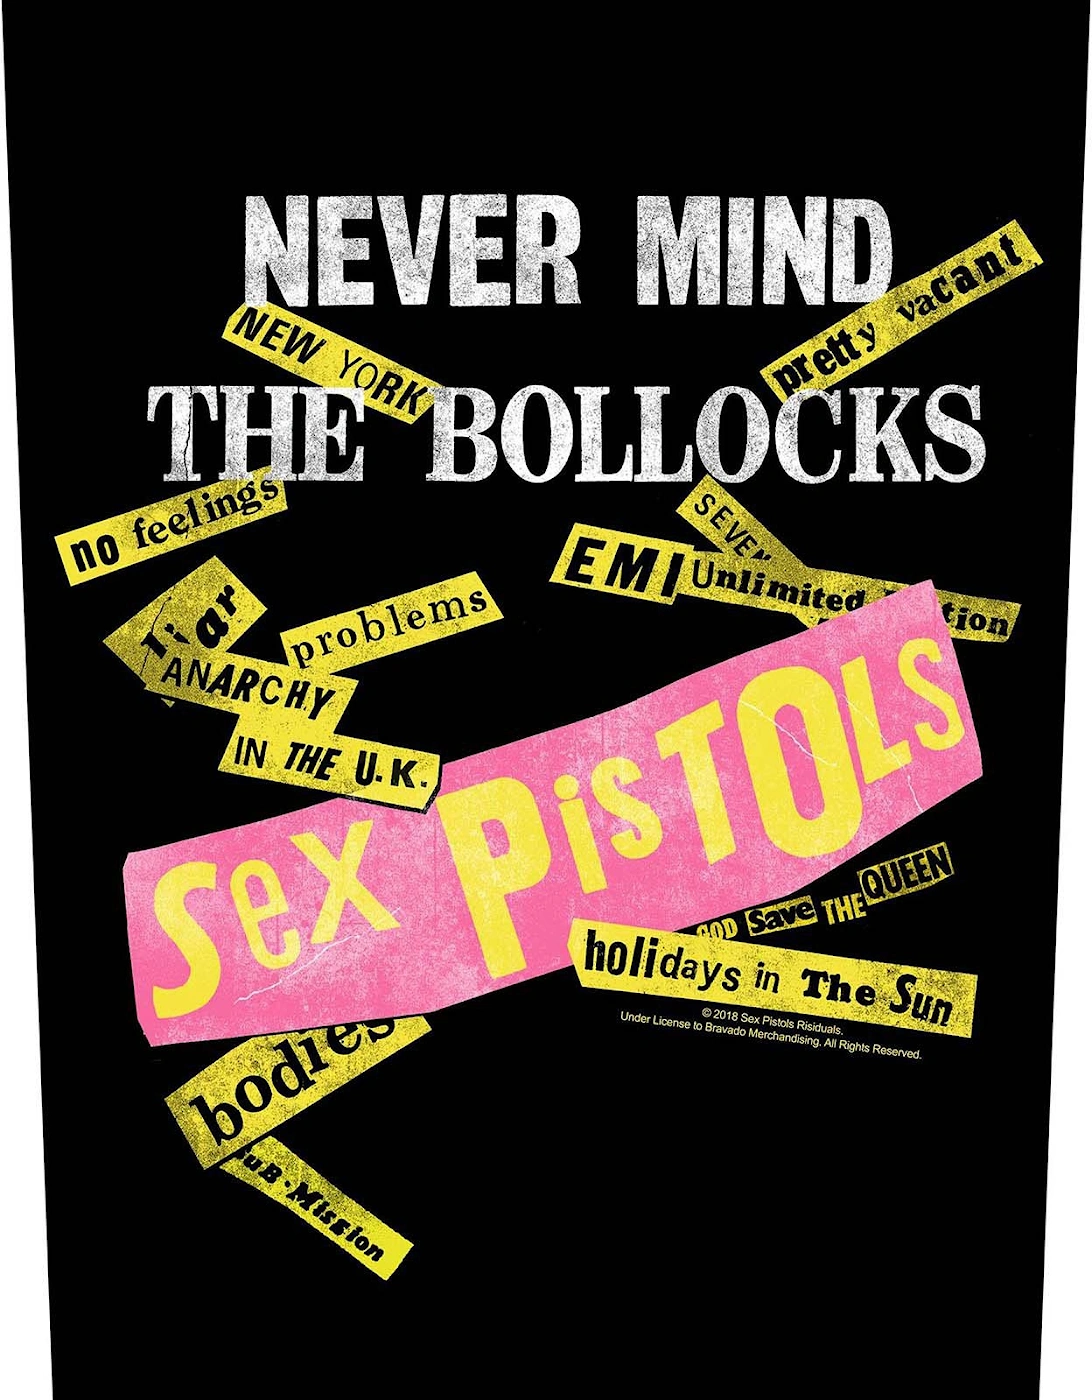 Never Mind The Bollocks Track List Patch